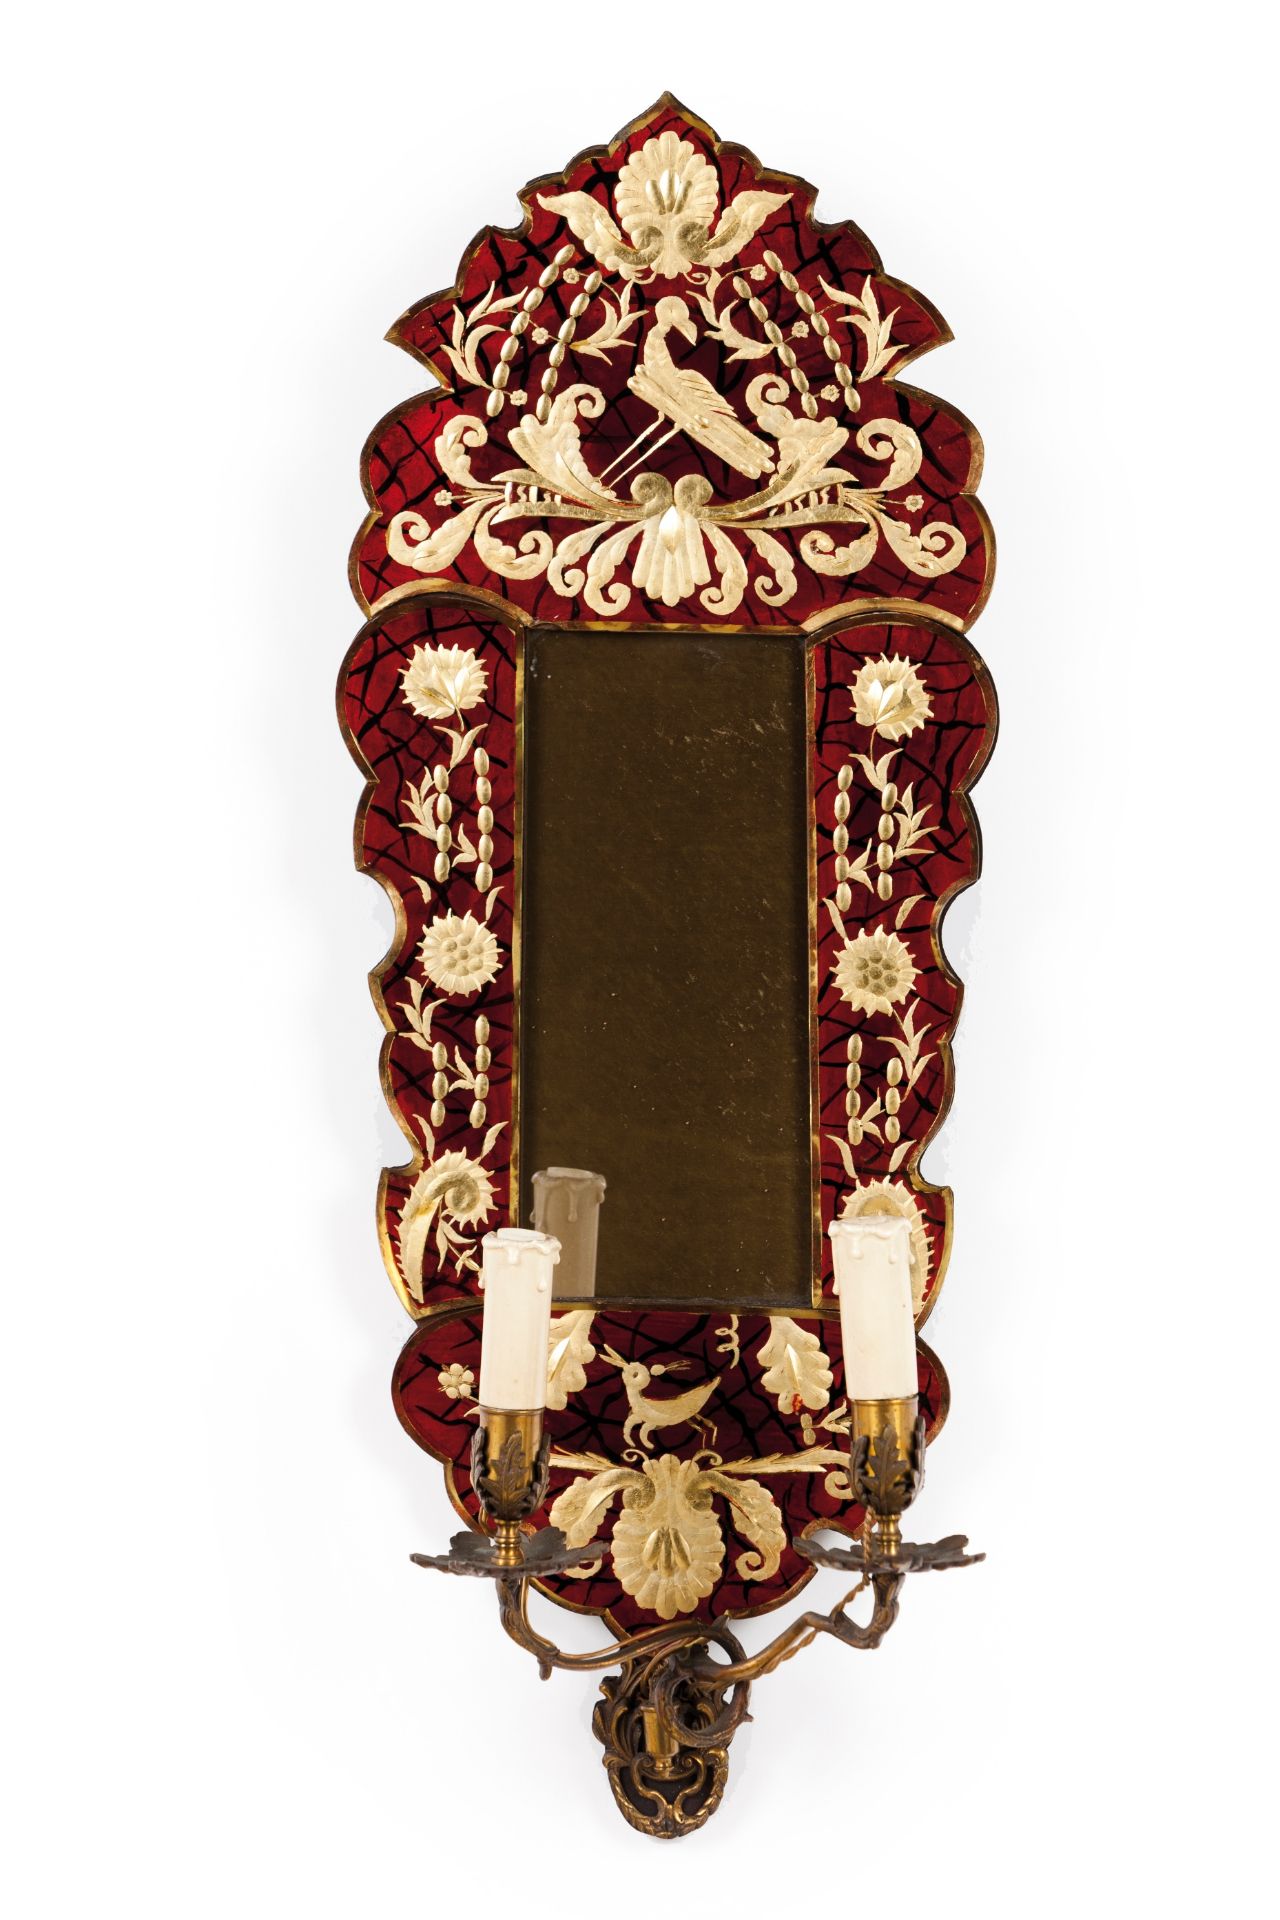 A pair of Venetian mirrors with sconces